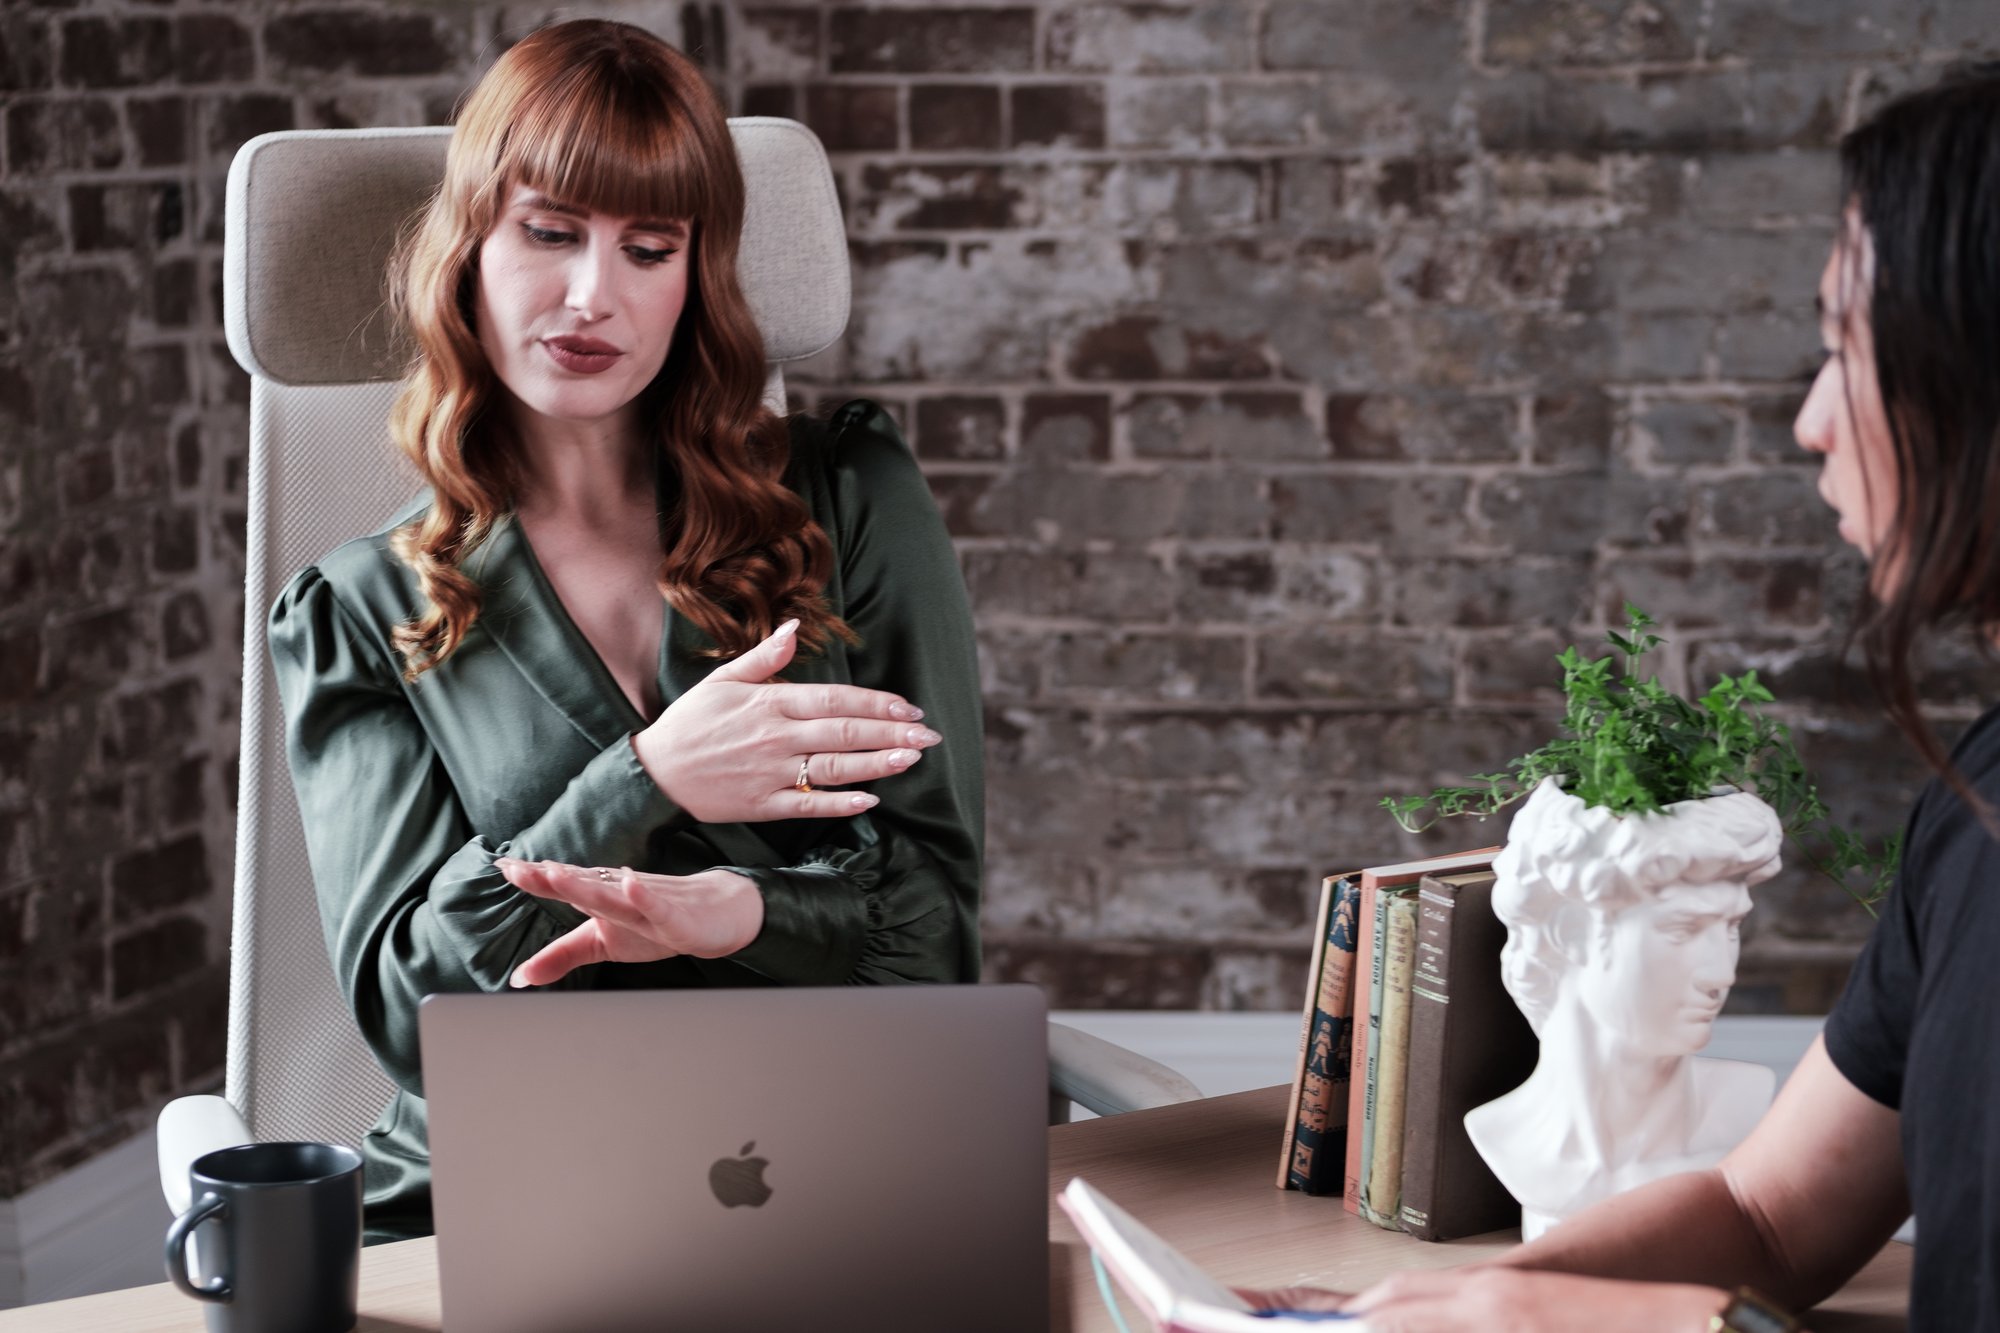 A long-haired woman with red hair is signing to the video Auslan interpreter through her laptop while she communicates face-to-face with her colleague in the office.